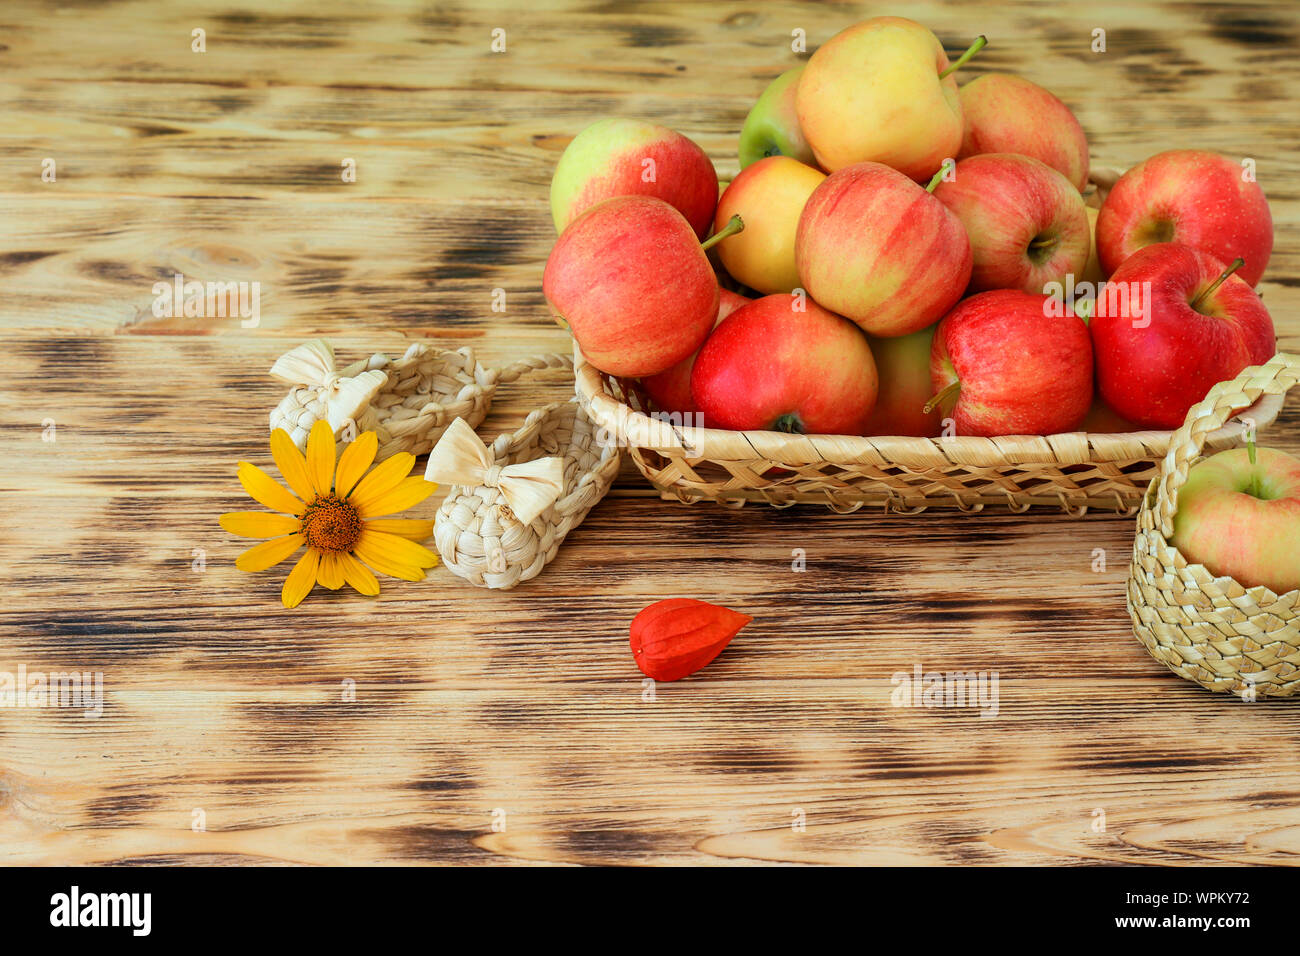 Red apples and autumn flowers lie in a wicker plate on a wooden table. Wicker bast shoes and apples in a basket. Healthy food and lifestyle Stock Photo